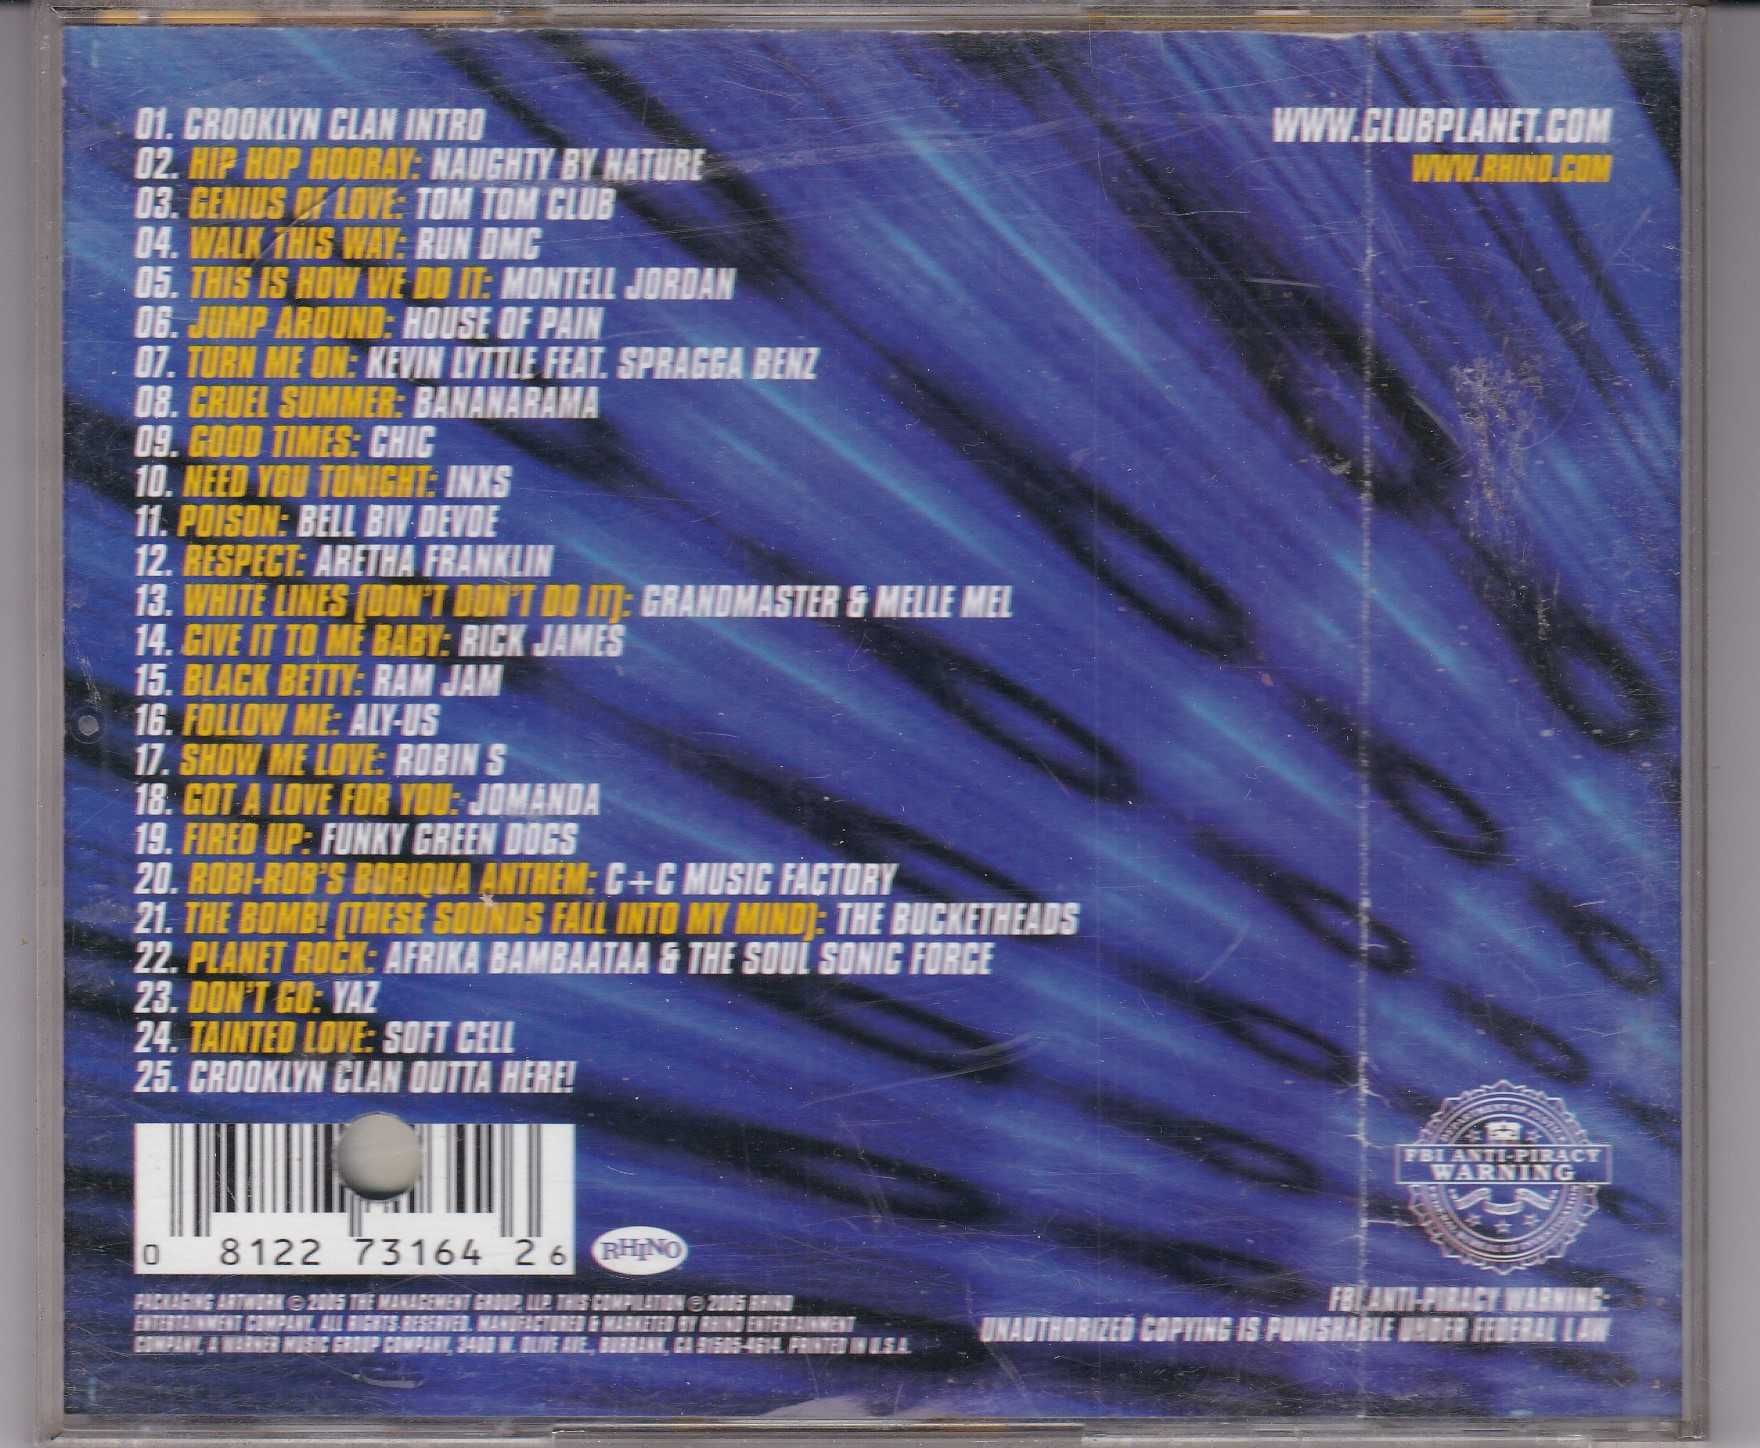 Clubplanet - Party Mix .CD .